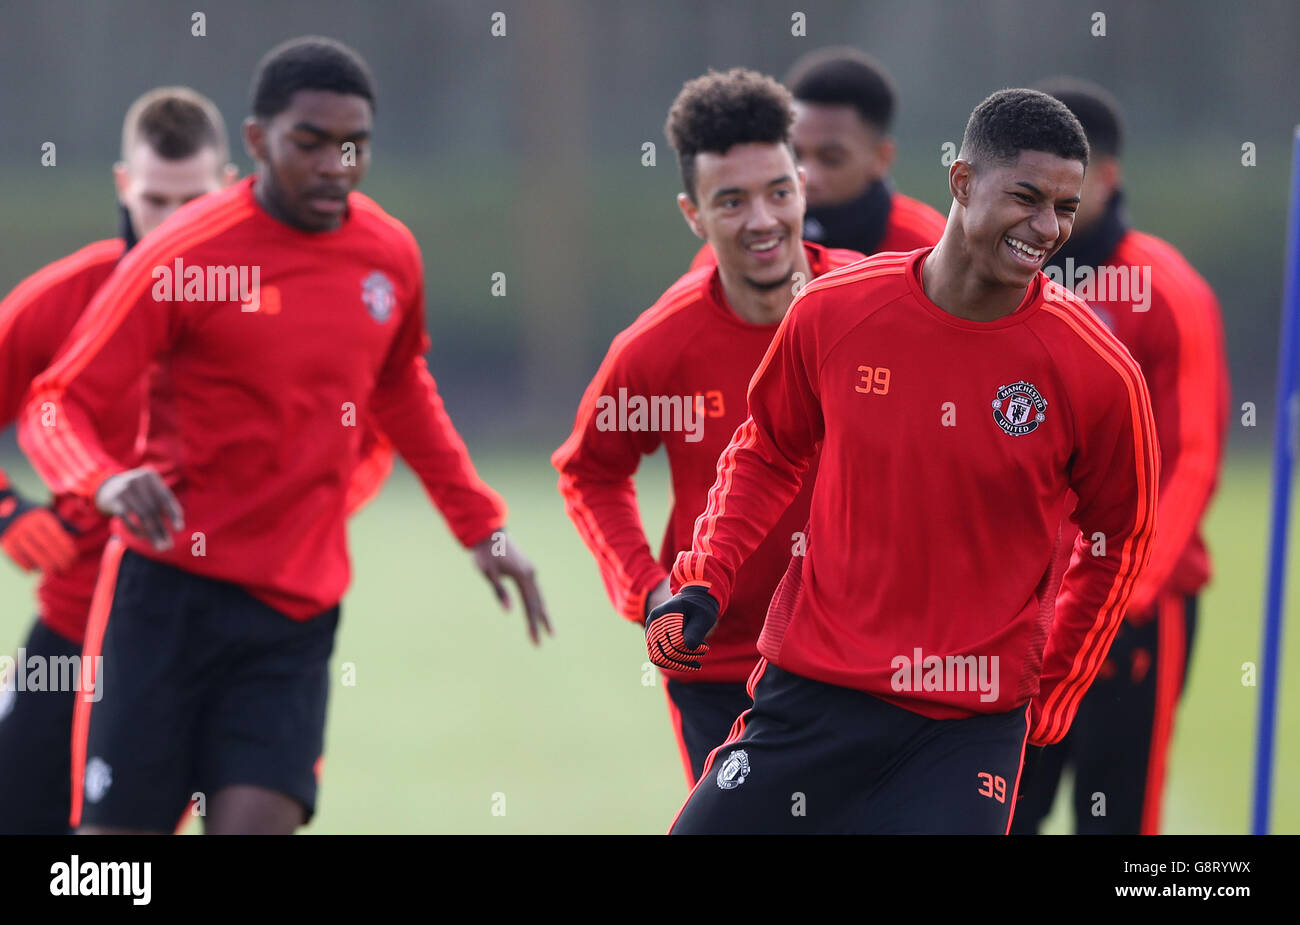 Manchester United's Marcus Rashford (right) Cameron Borthwick-Jackson (centre) and Timothy Fosu-Mensah (left) during a training session at the AON Training Complex, Carrington. PRESS ASSOCIATION Photo. Picture date: Wednesday March 16, 2016. See PA story SOCCER Man Utd. Photo credit should read: Martin Rickett/PA Wire.,during a training session at the AON Training Complex, Carrington. PRESS ASSOCIATION Photo. Picture date: Wednesday March 16, 2016. See PA story SOCCER Man Utd. Photo credit should read: Martin Rickett/PA Wire. Stock Photo